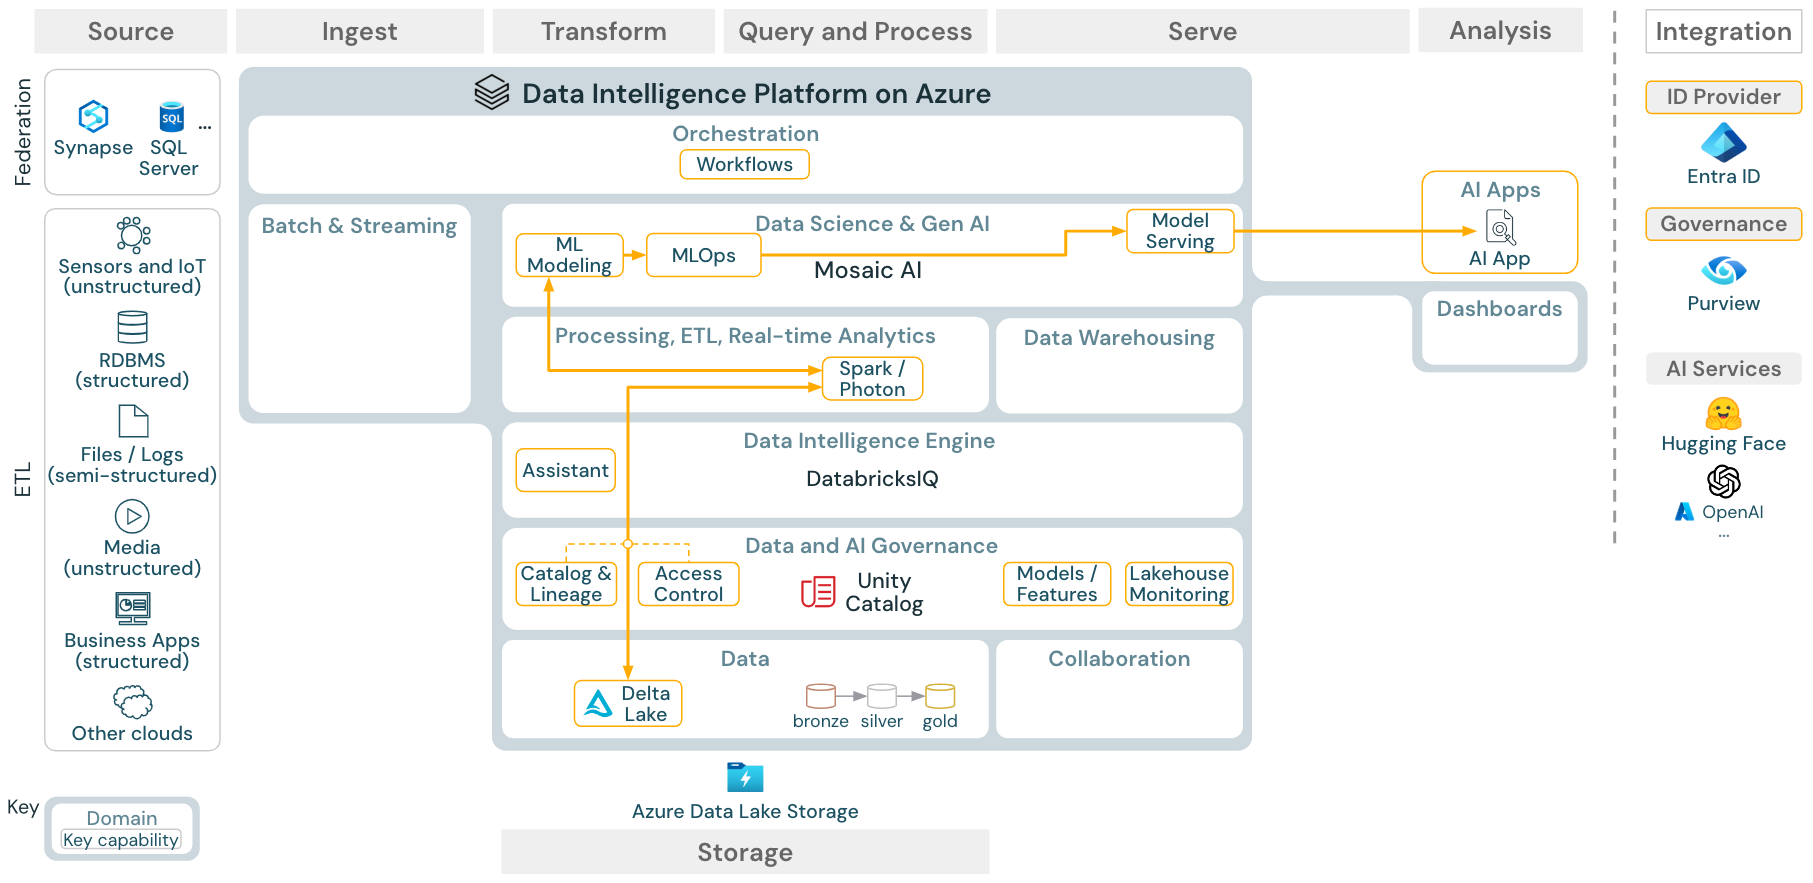 Machine learning and AI reference architecture for Azure Databricks